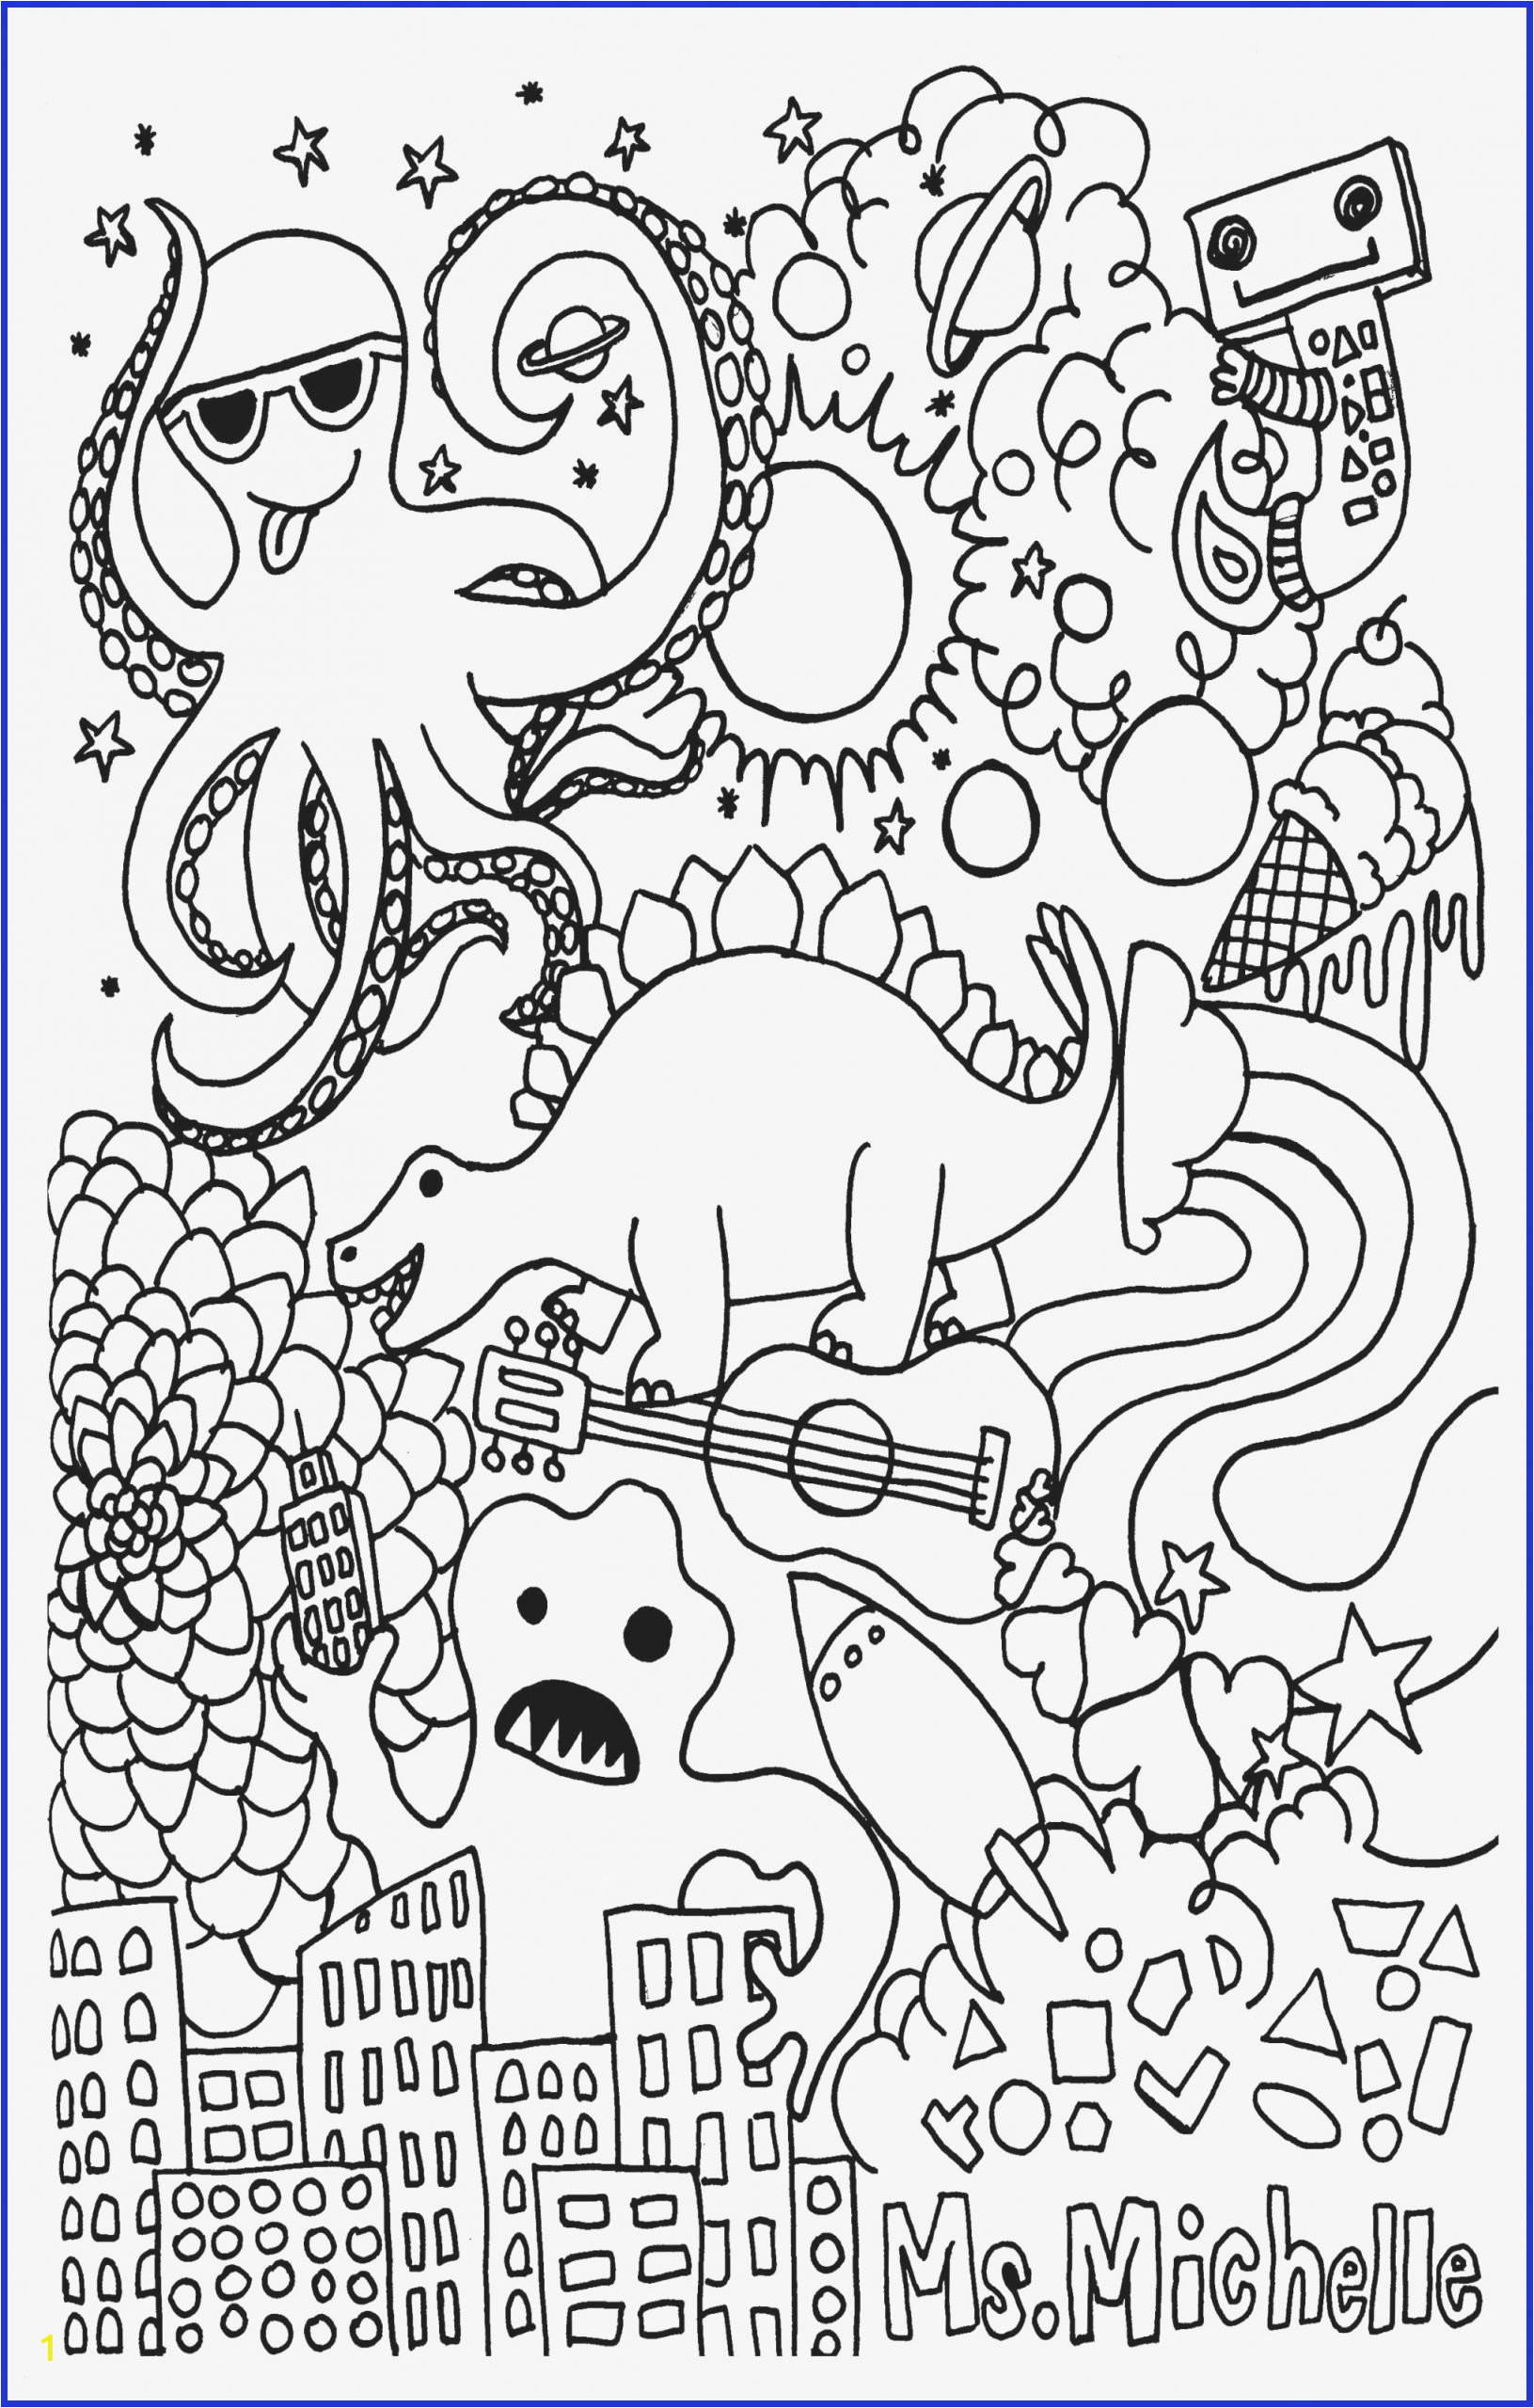 disney christmas coloring page best of coloring pages valentines day coloring pages hungry of disney christmas coloring page